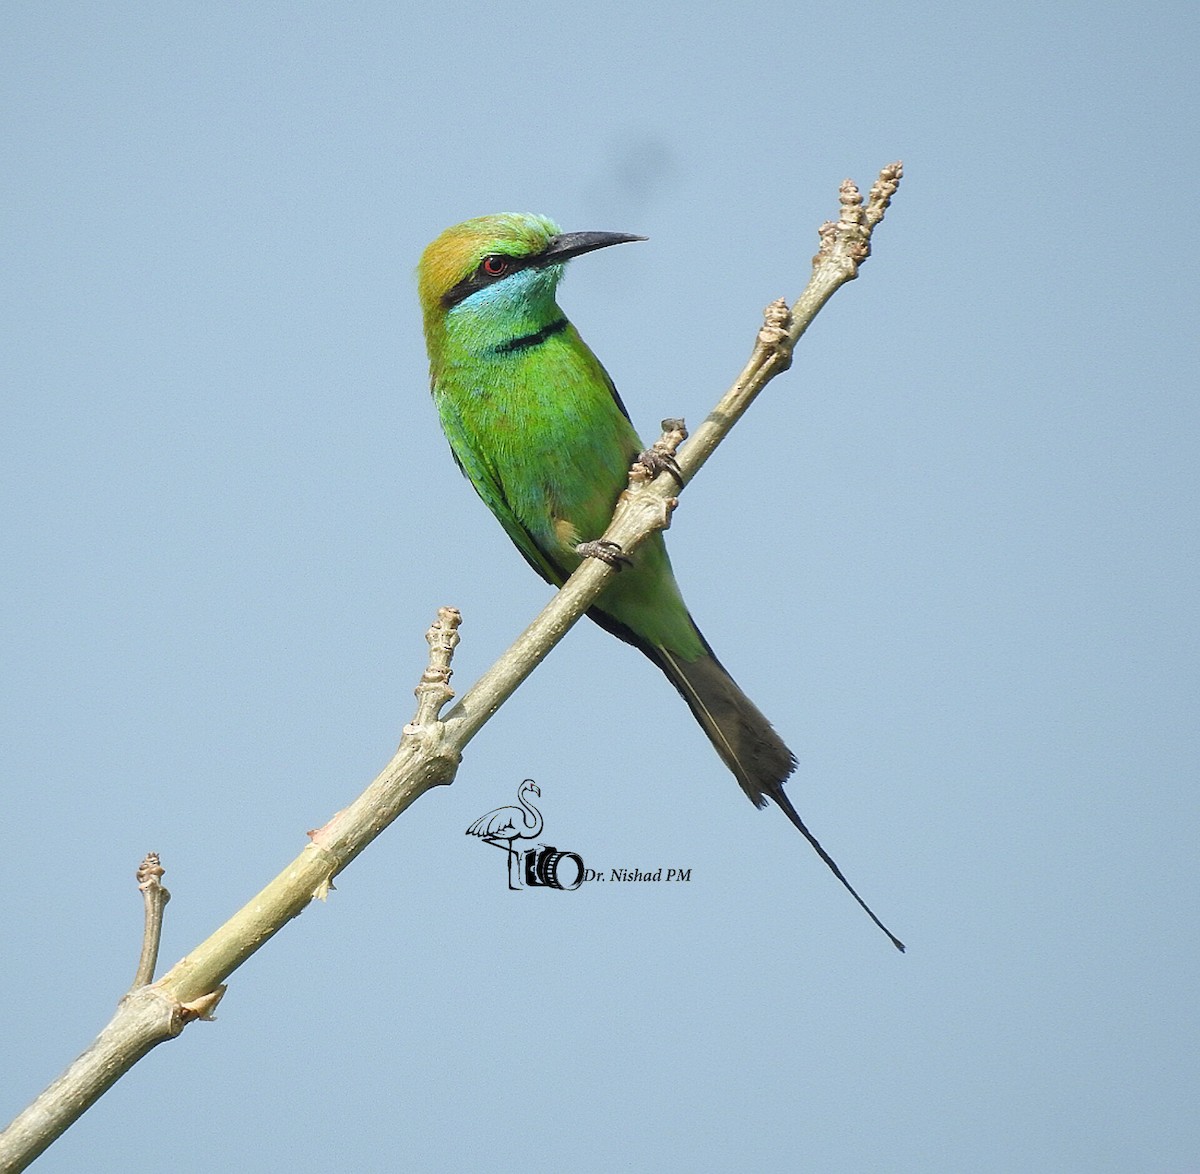 Asian Green Bee-eater - Dr. NISHAD PM